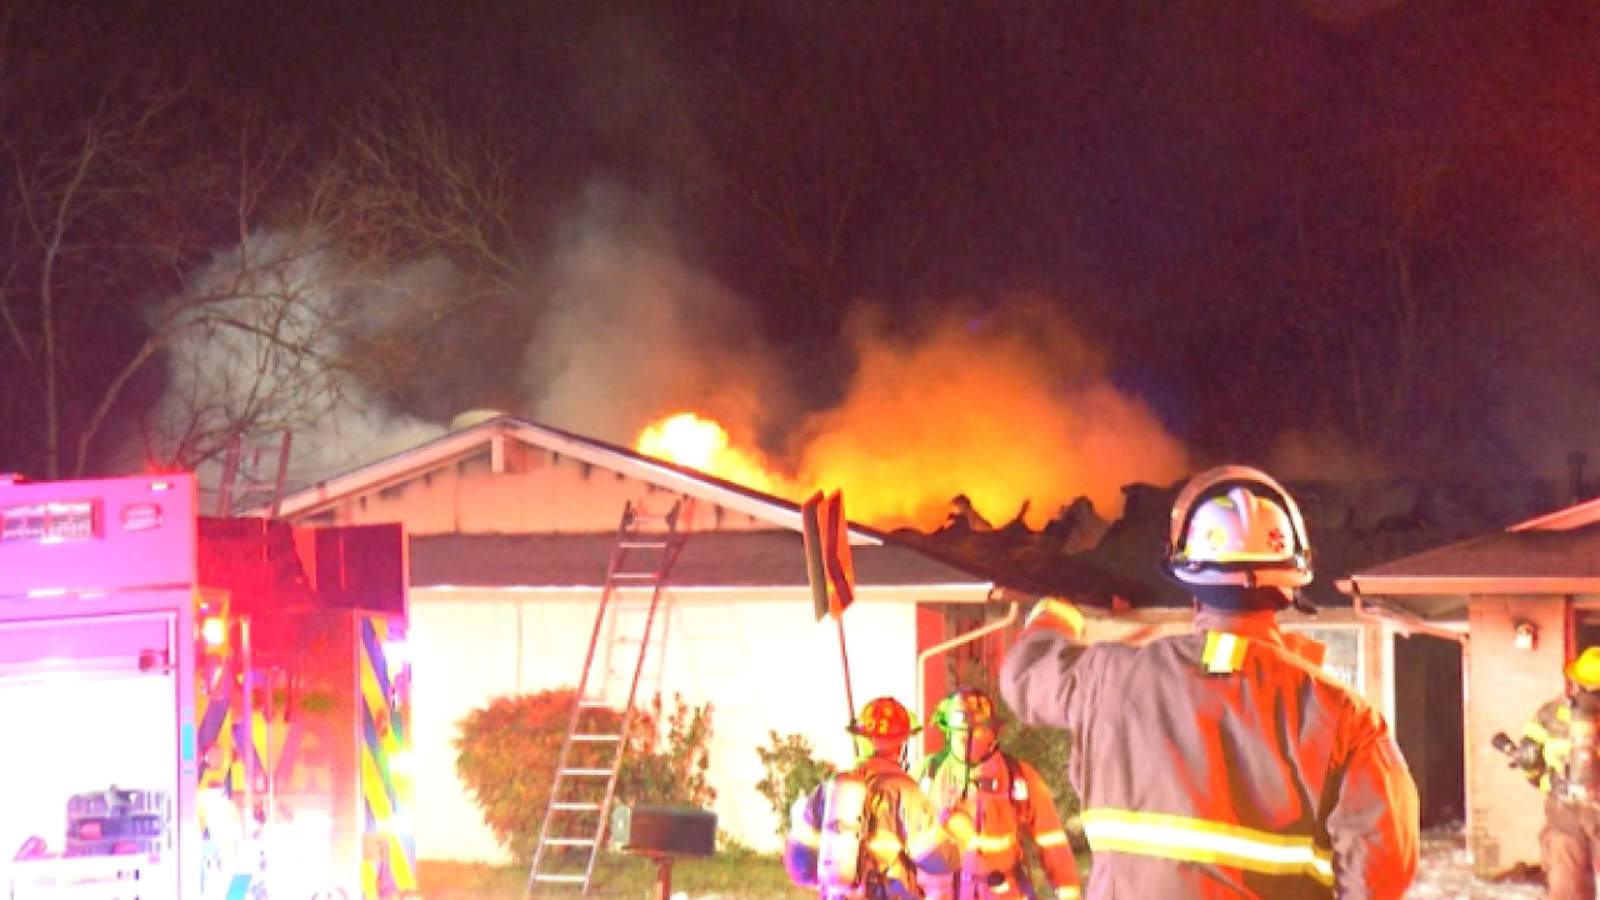 Strong winds spread fire throughout duplex in NE Bexar County